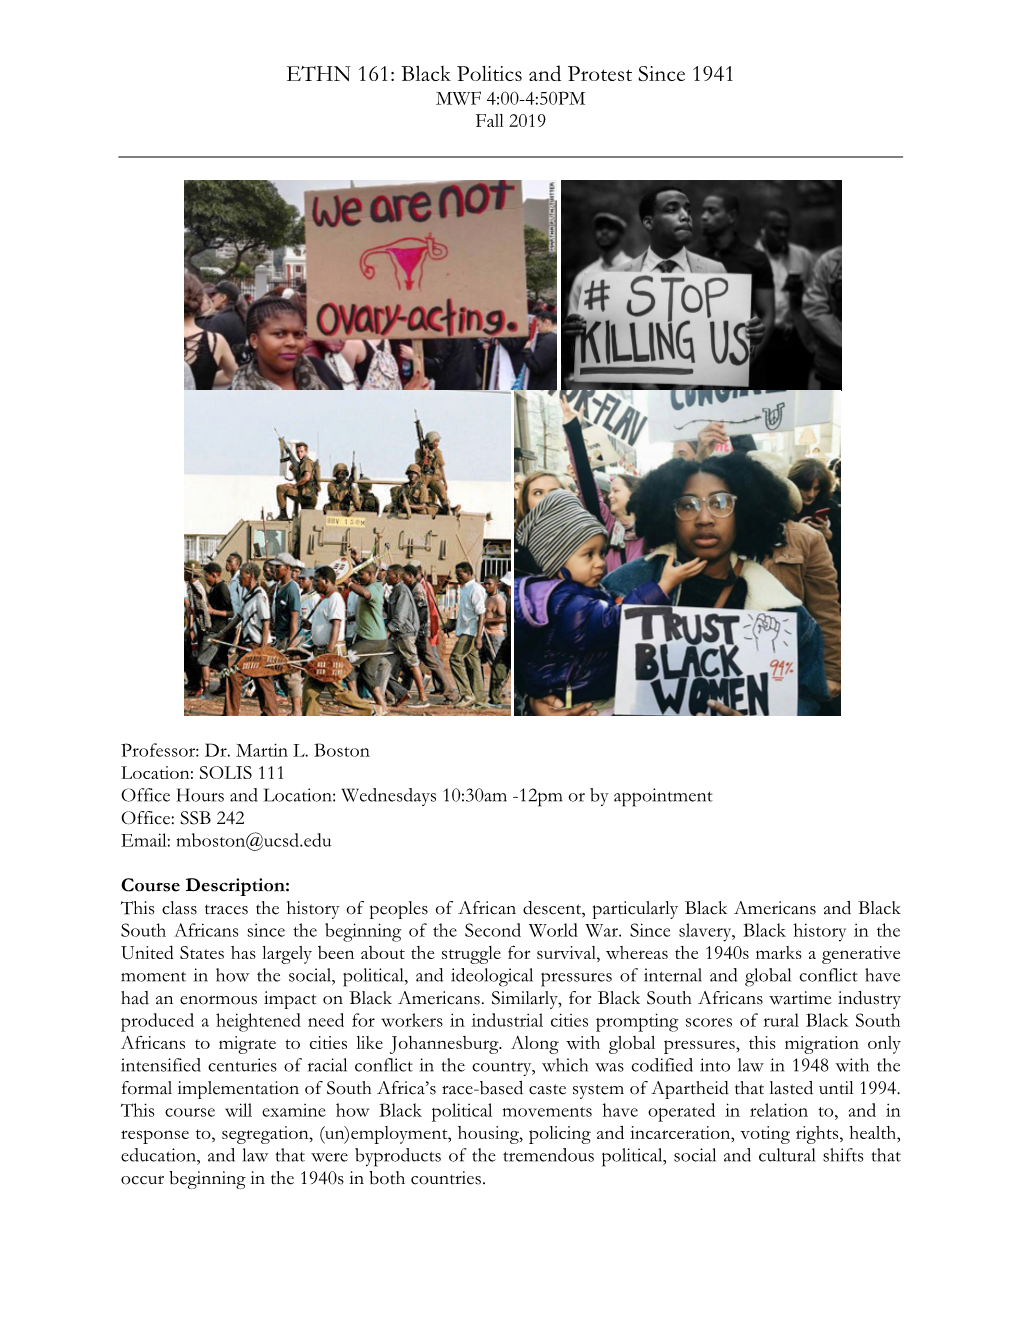 ETHN 161: Black Politics and Protest Since 1941 MWF 4:00-4:50PM Fall 2019